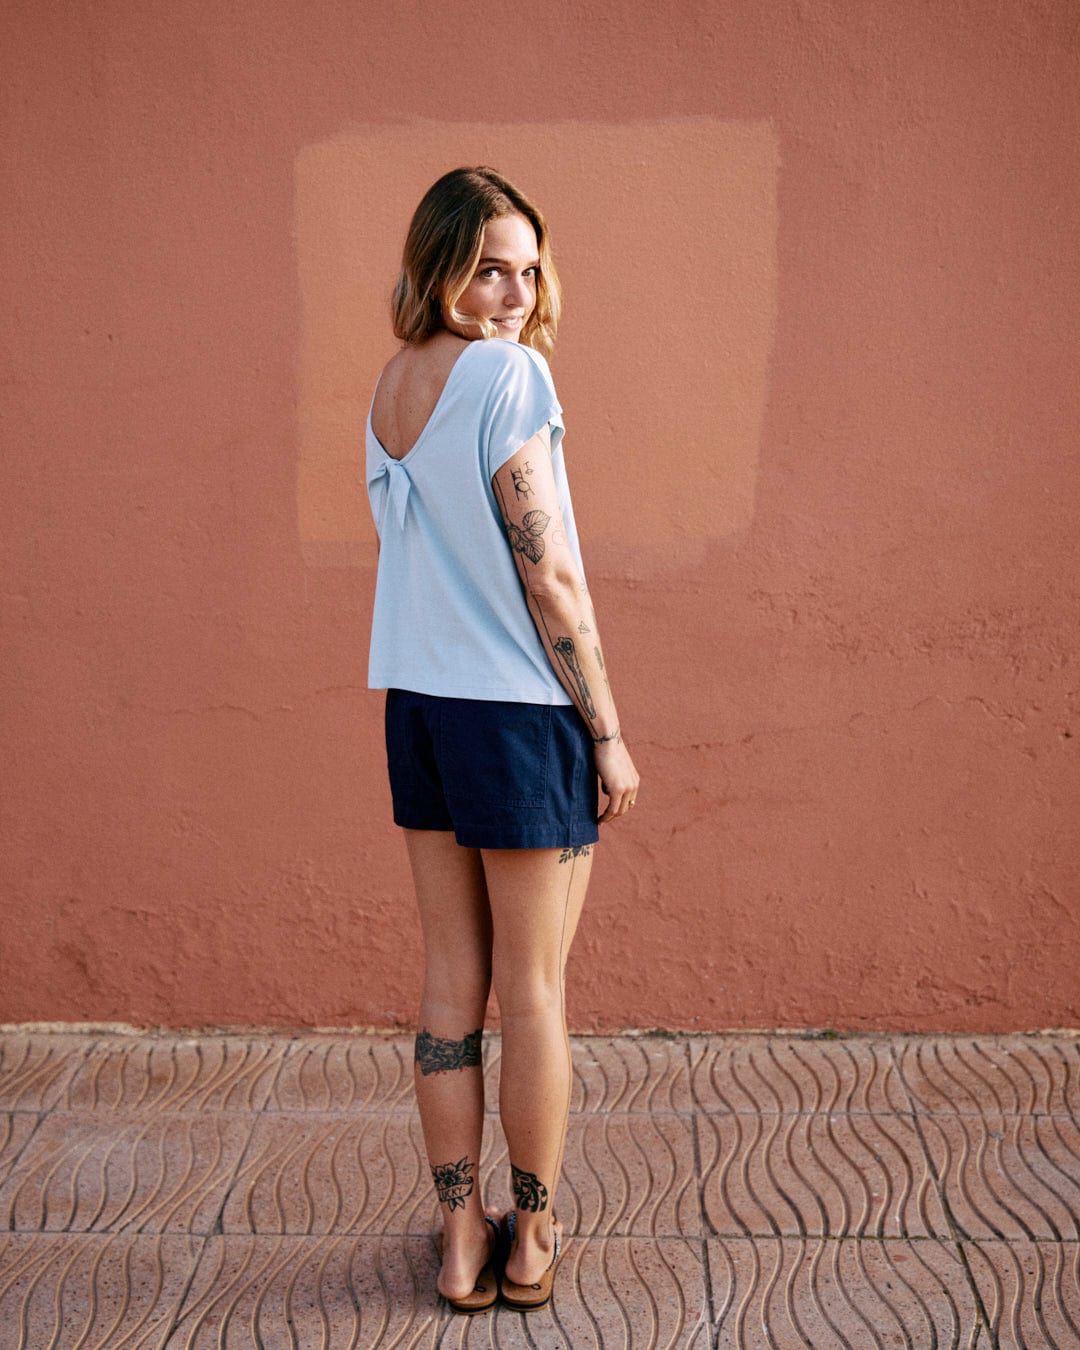 A woman with tattoos wearing a Saltrock Rhoda - Womens T-Shirt - Light Blue featuring a dropped back detail and navy shorts is standing outdoors against a pink wall, looking back over her shoulder and smiling.